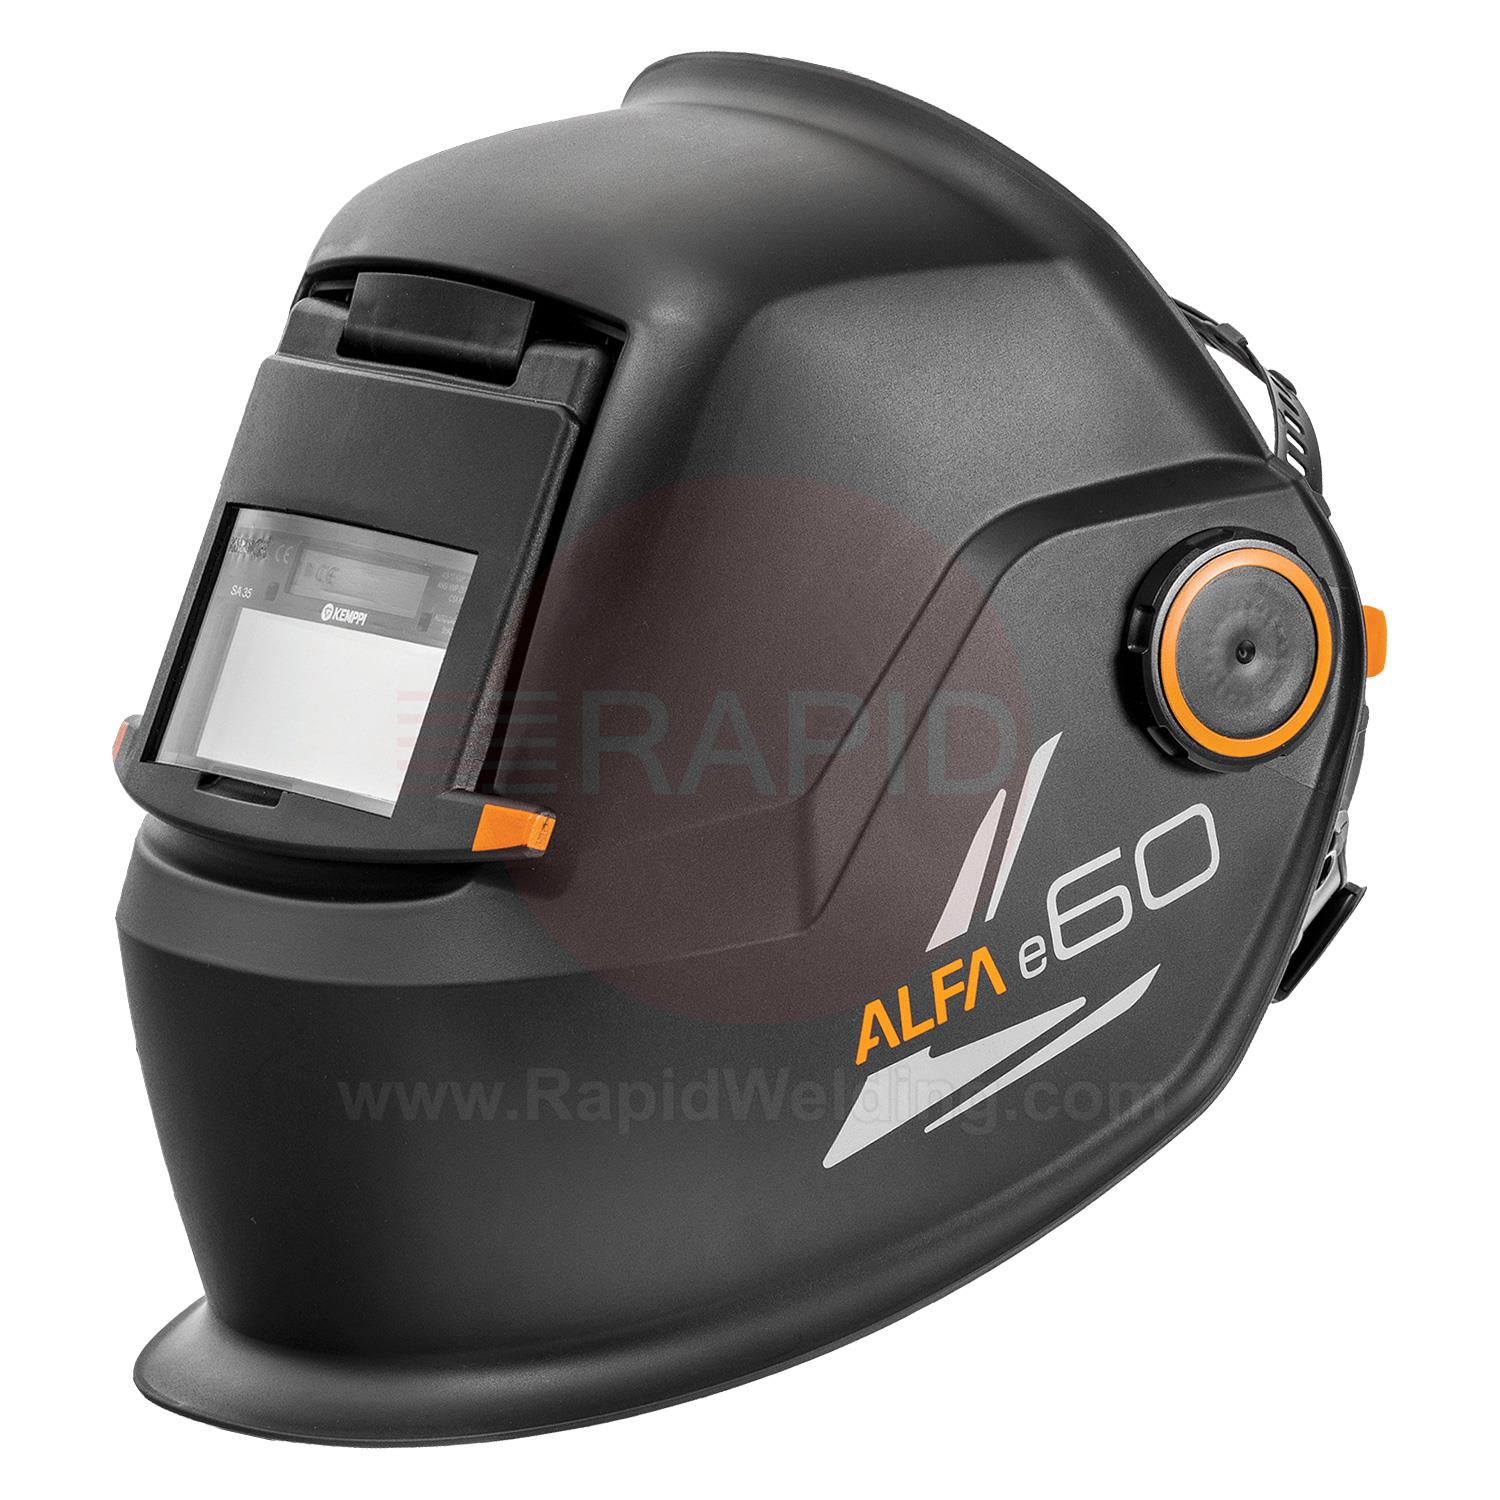 9873021  Kemppi Alfa e60A Welding Helmet, with Variable Shade 9-13 ADF and Flip Front for Grinding